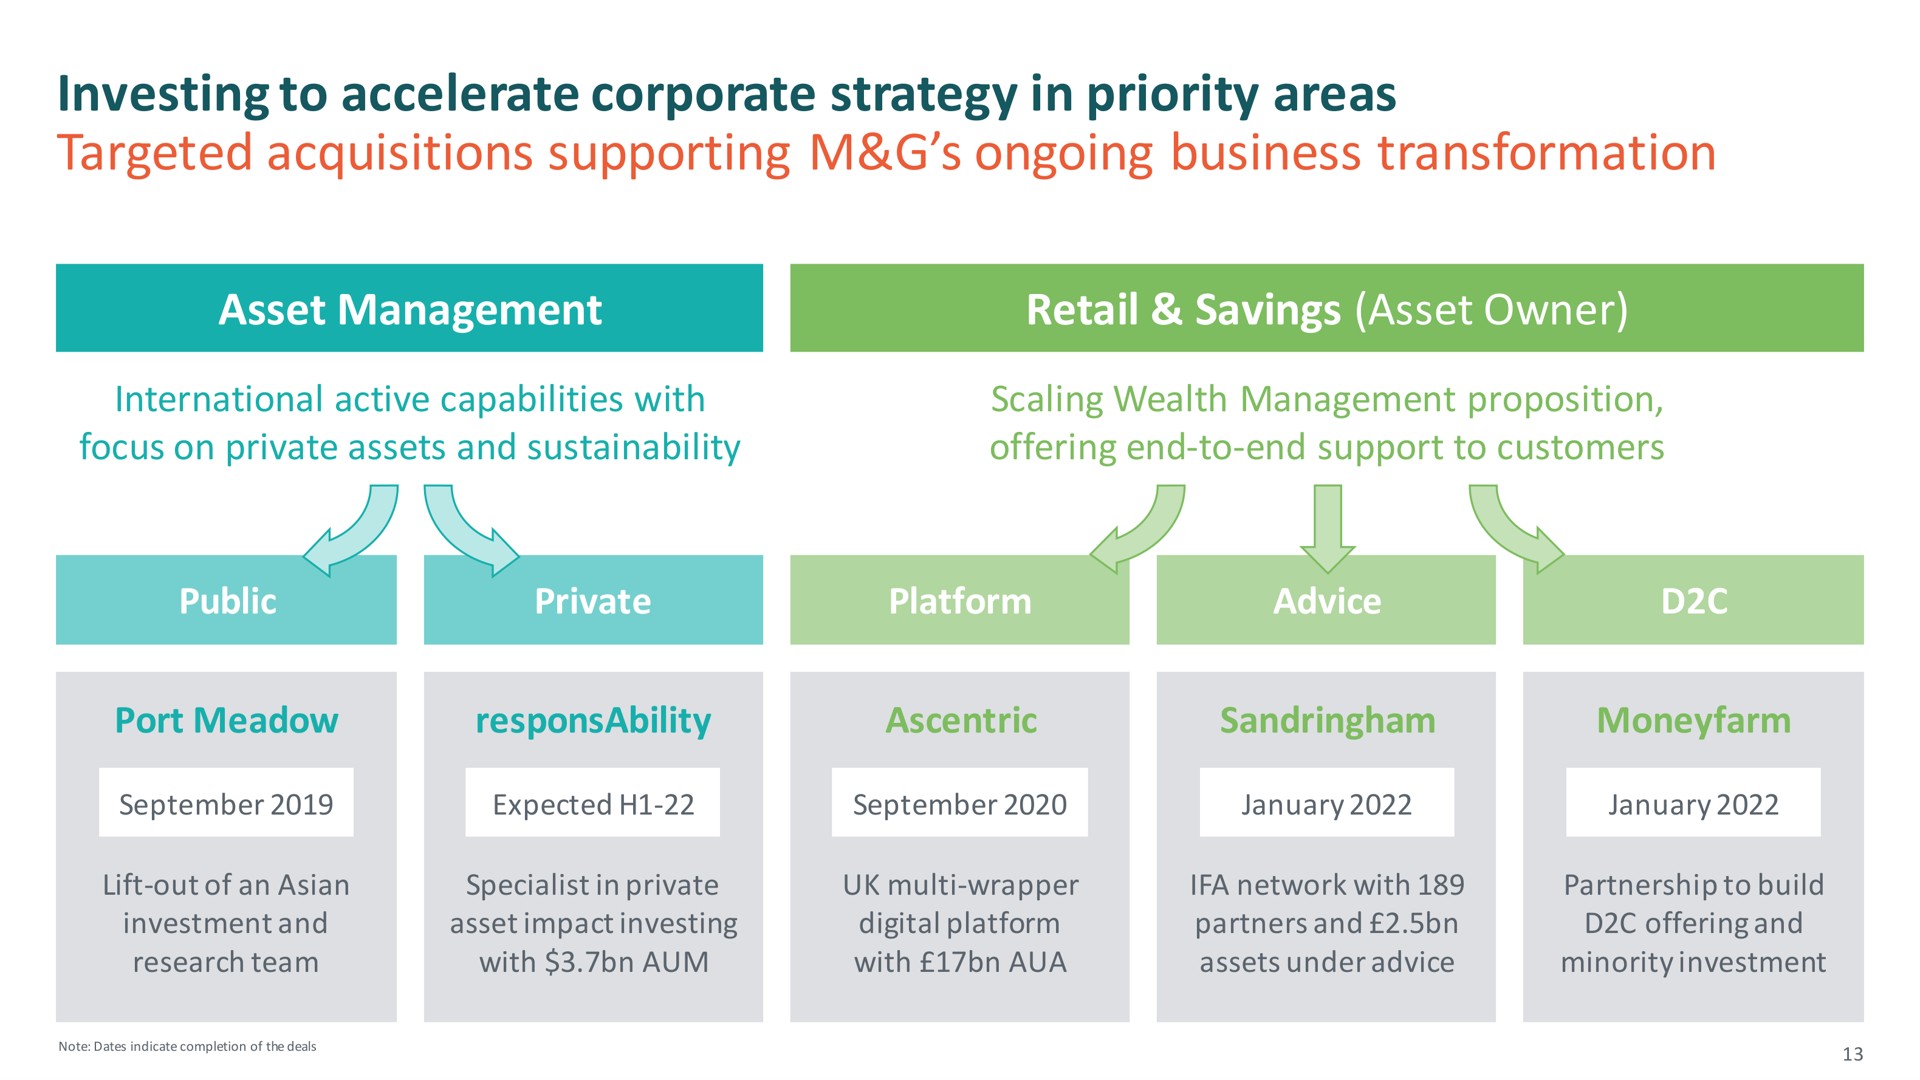 investing to accelerate corporate strategy in priority areas targeted acquisitions supporting ongoing business transformation | M&G